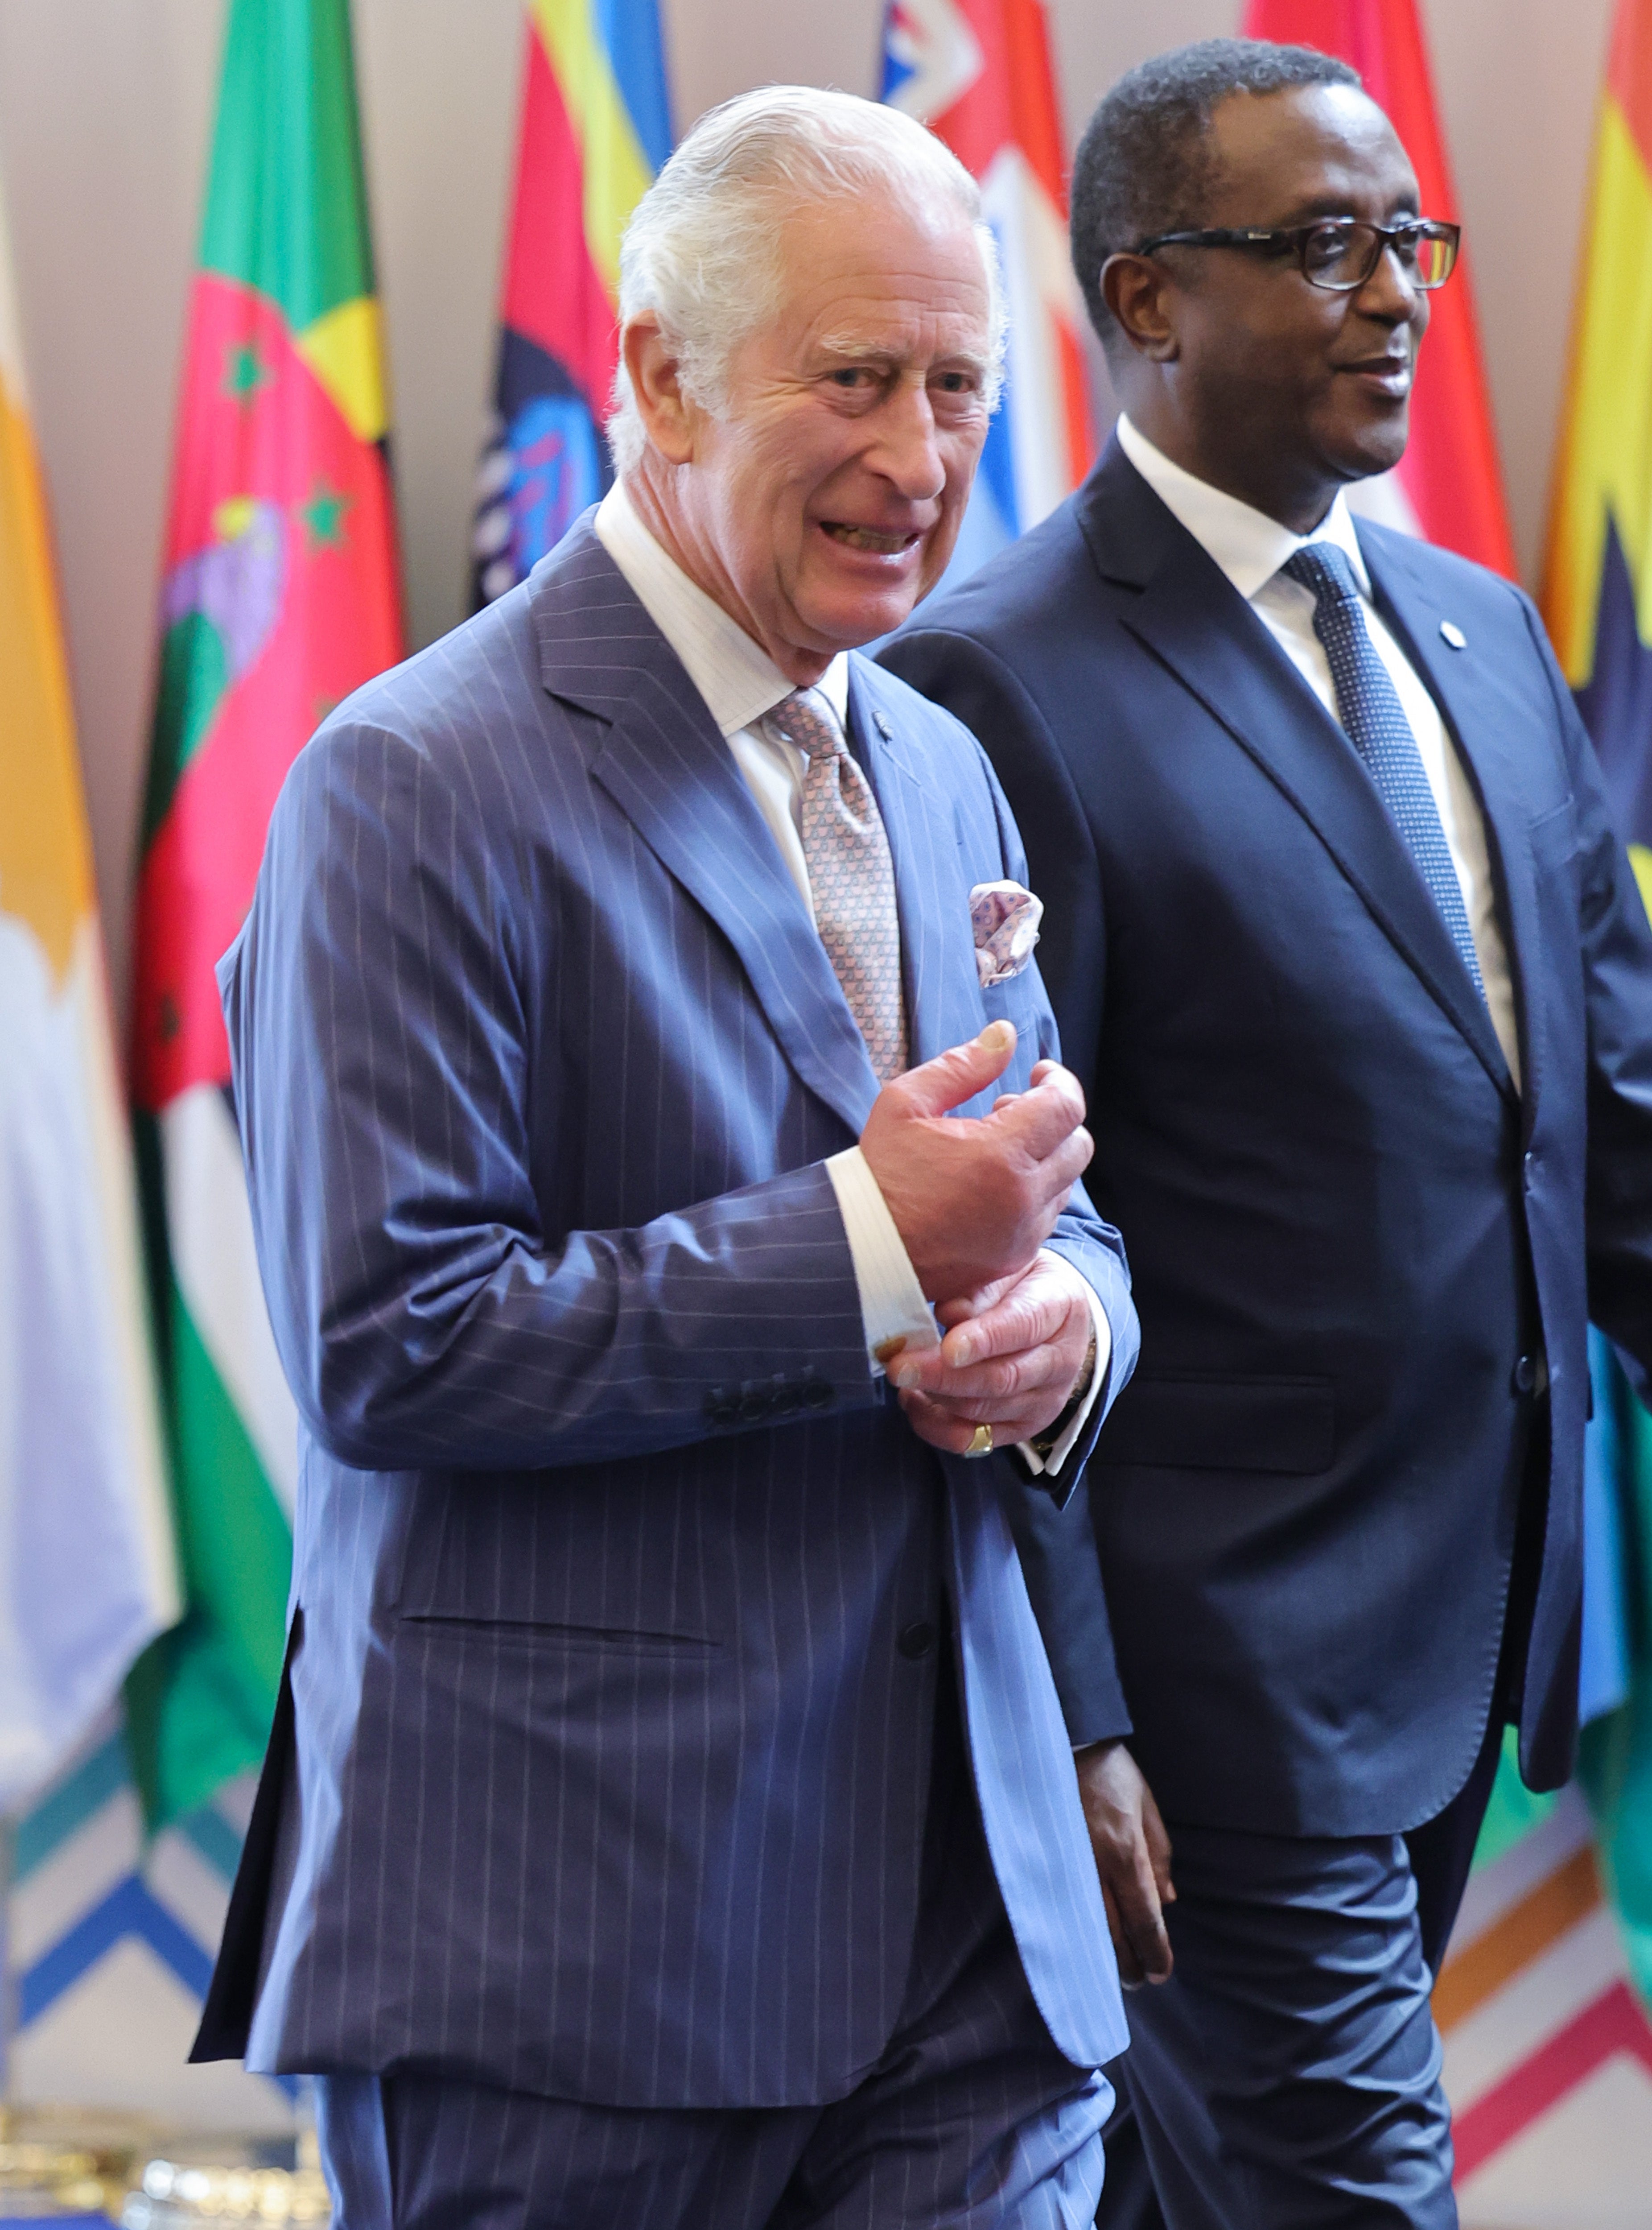 Prince Charles was speaking at a Commonwealth summit